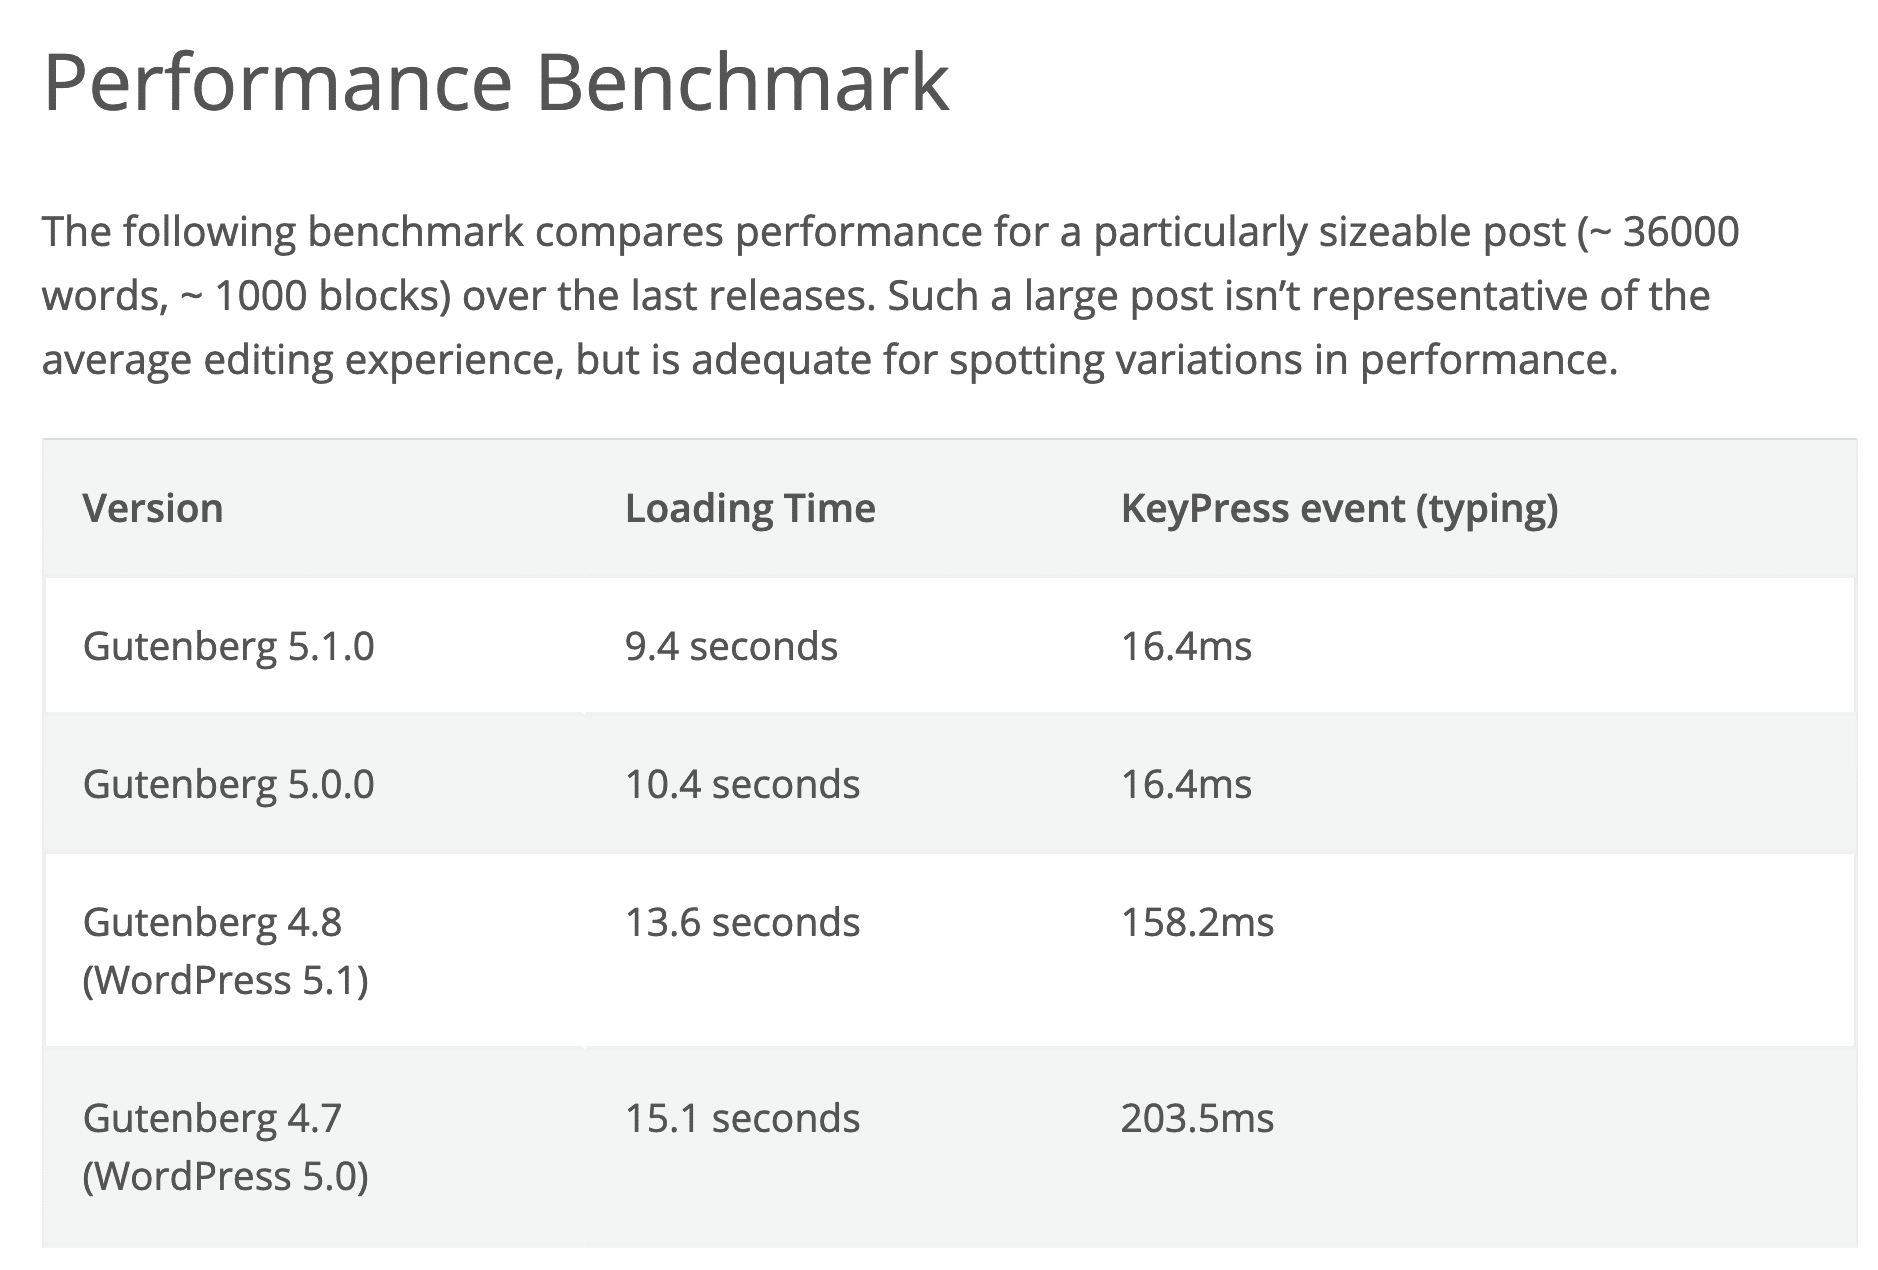 Gutenberg performance benchmarks for different versions